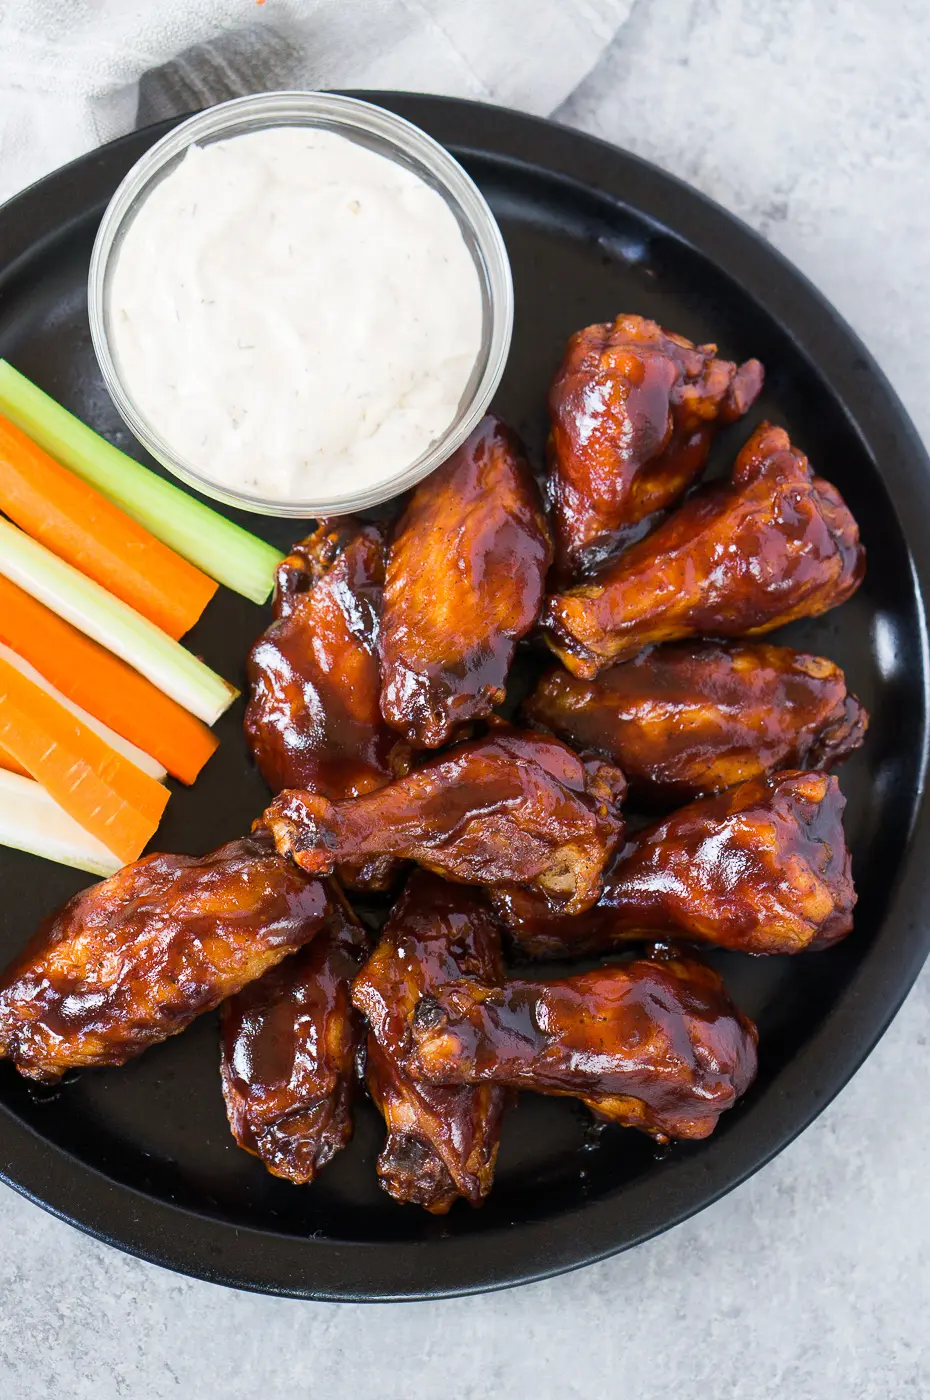 BBQ Chicken Wing Recipe with side of carrots, celery and blue cheese